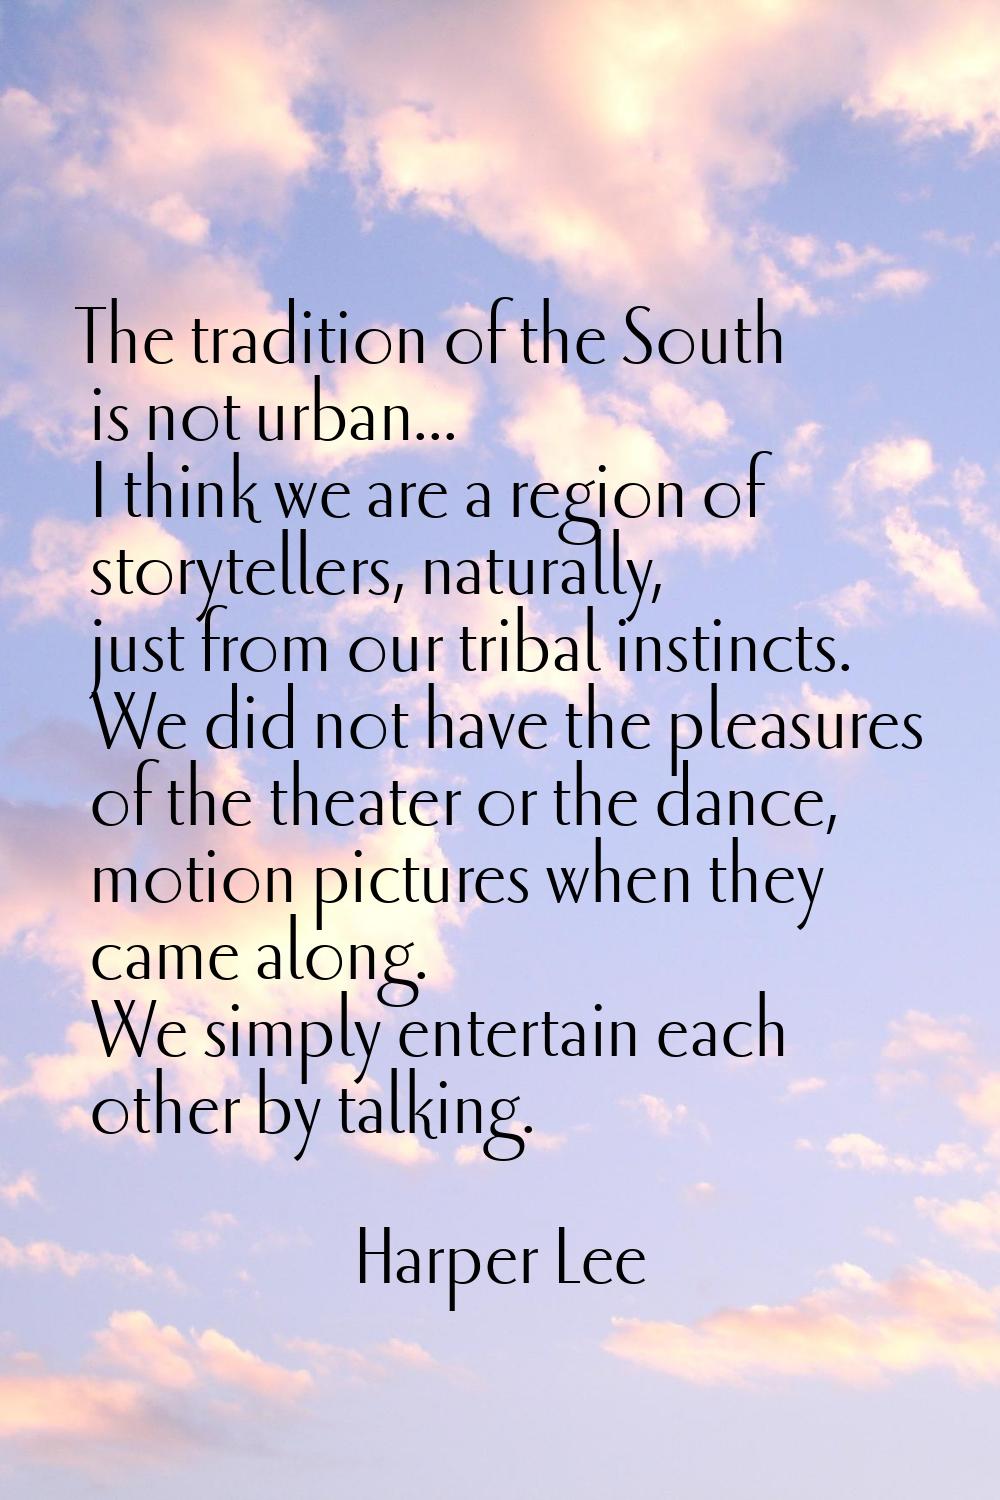 The tradition of the South is not urban... I think we are a region of storytellers, naturally, just